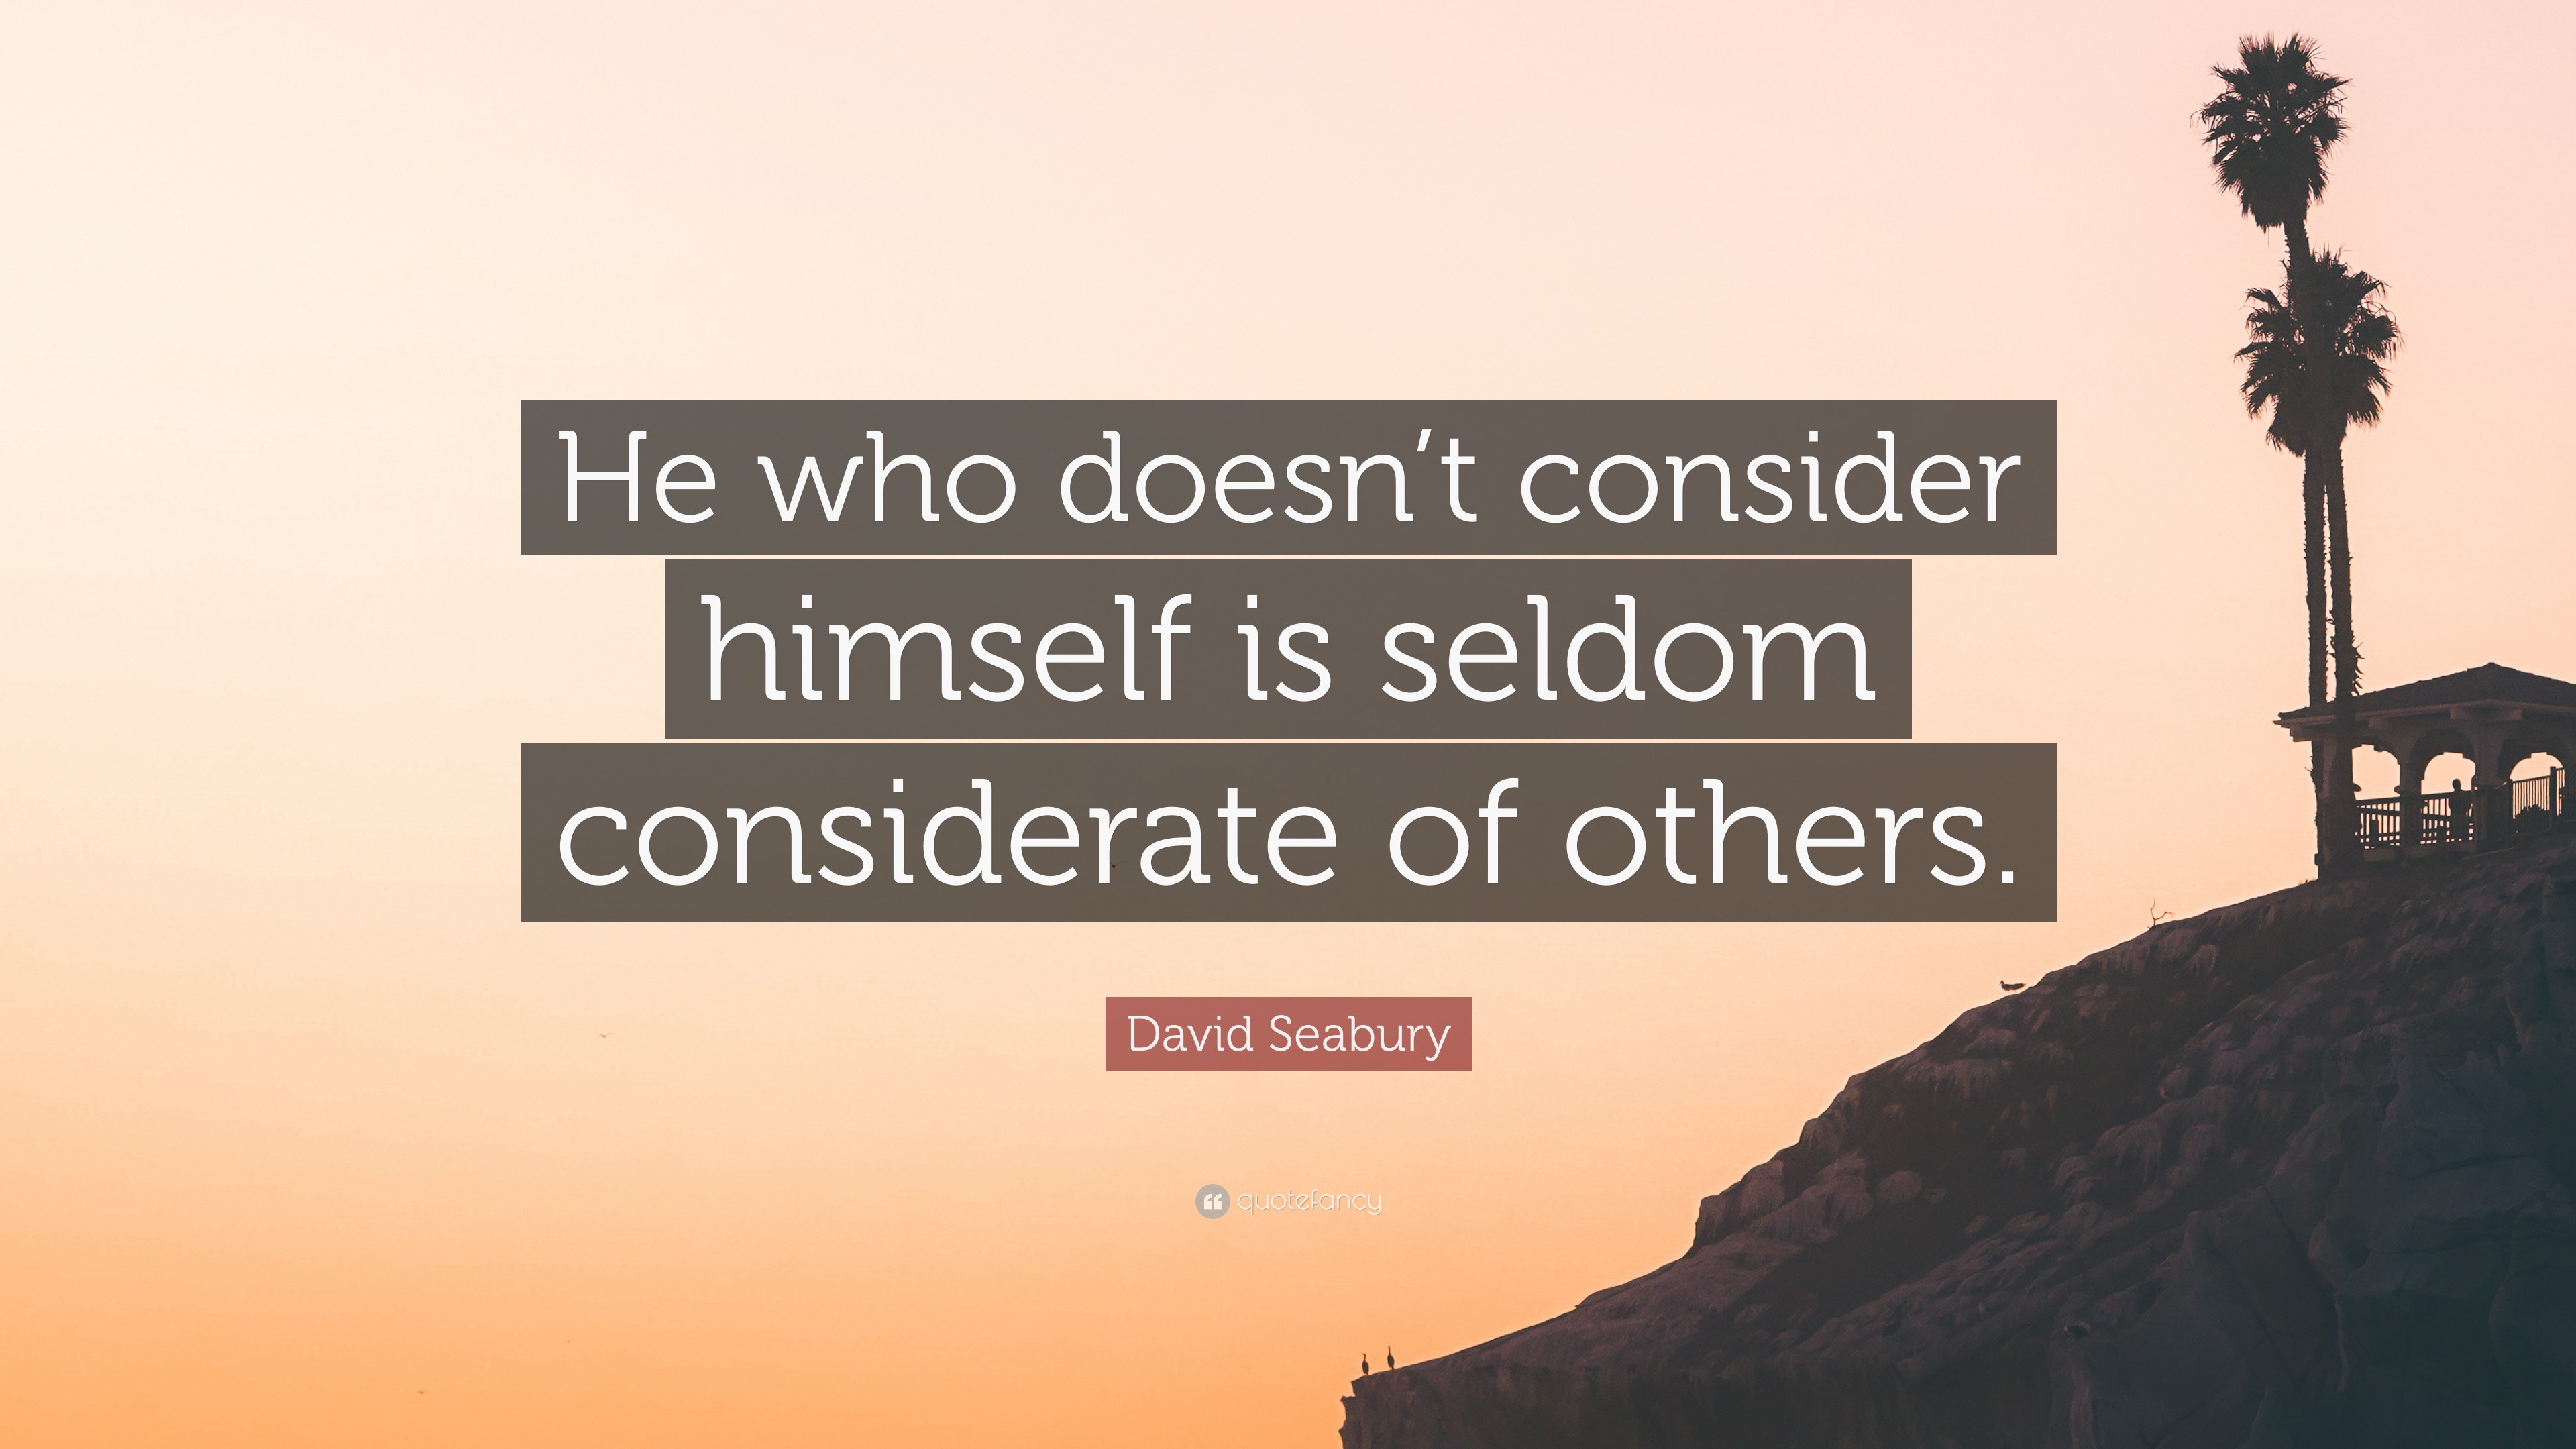 david-seabury-quote-he-who-doesn-t-consider-himself-is-seldom-considerate-of-others